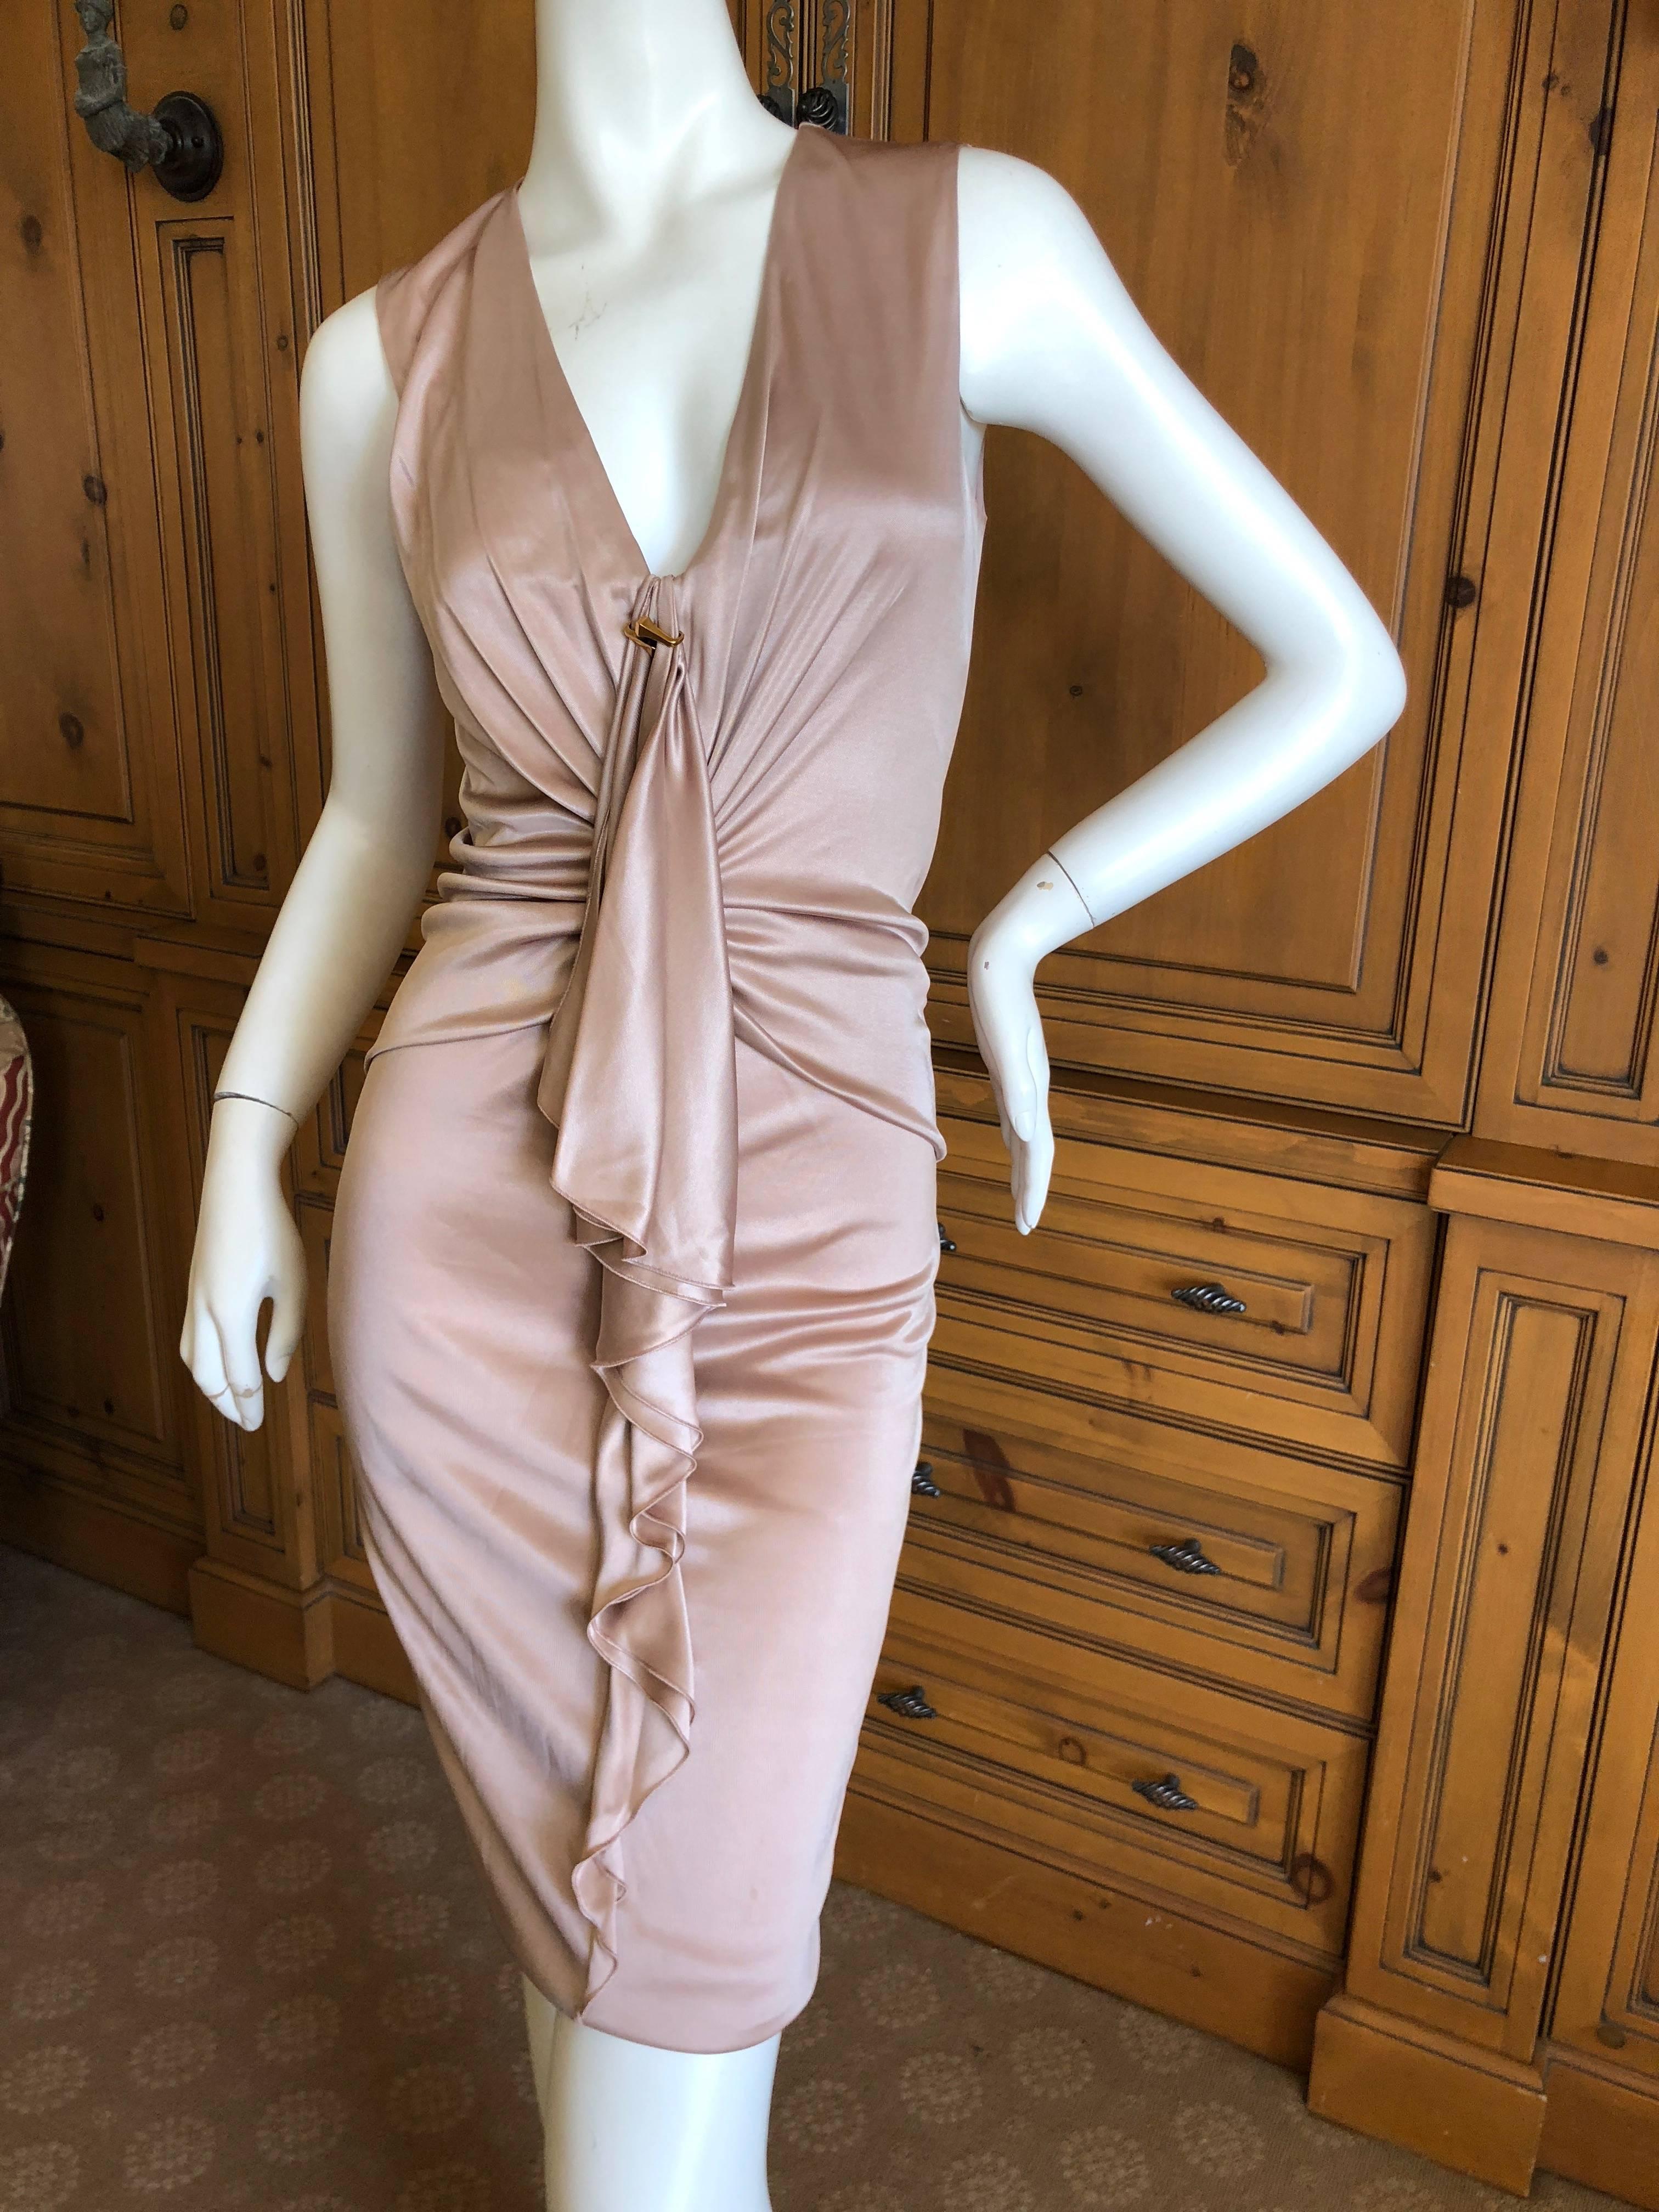 Gucci by Tom Ford Rose Gold Gathered Sleeveless Cocktail Dress In Excellent Condition For Sale In Cloverdale, CA